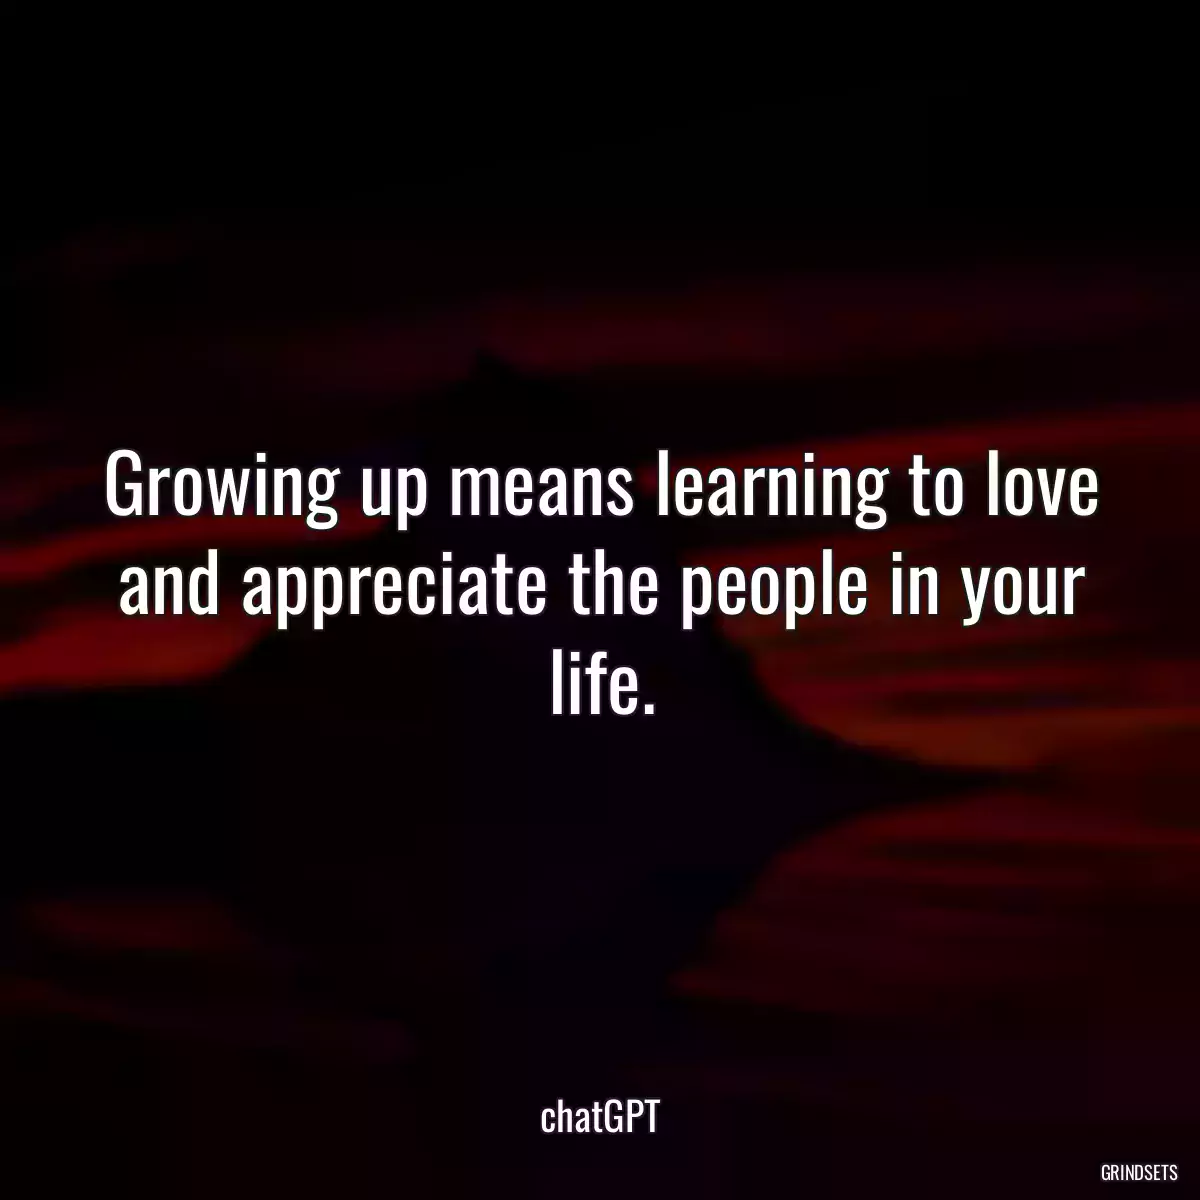 Growing up means learning to love and appreciate the people in your life.